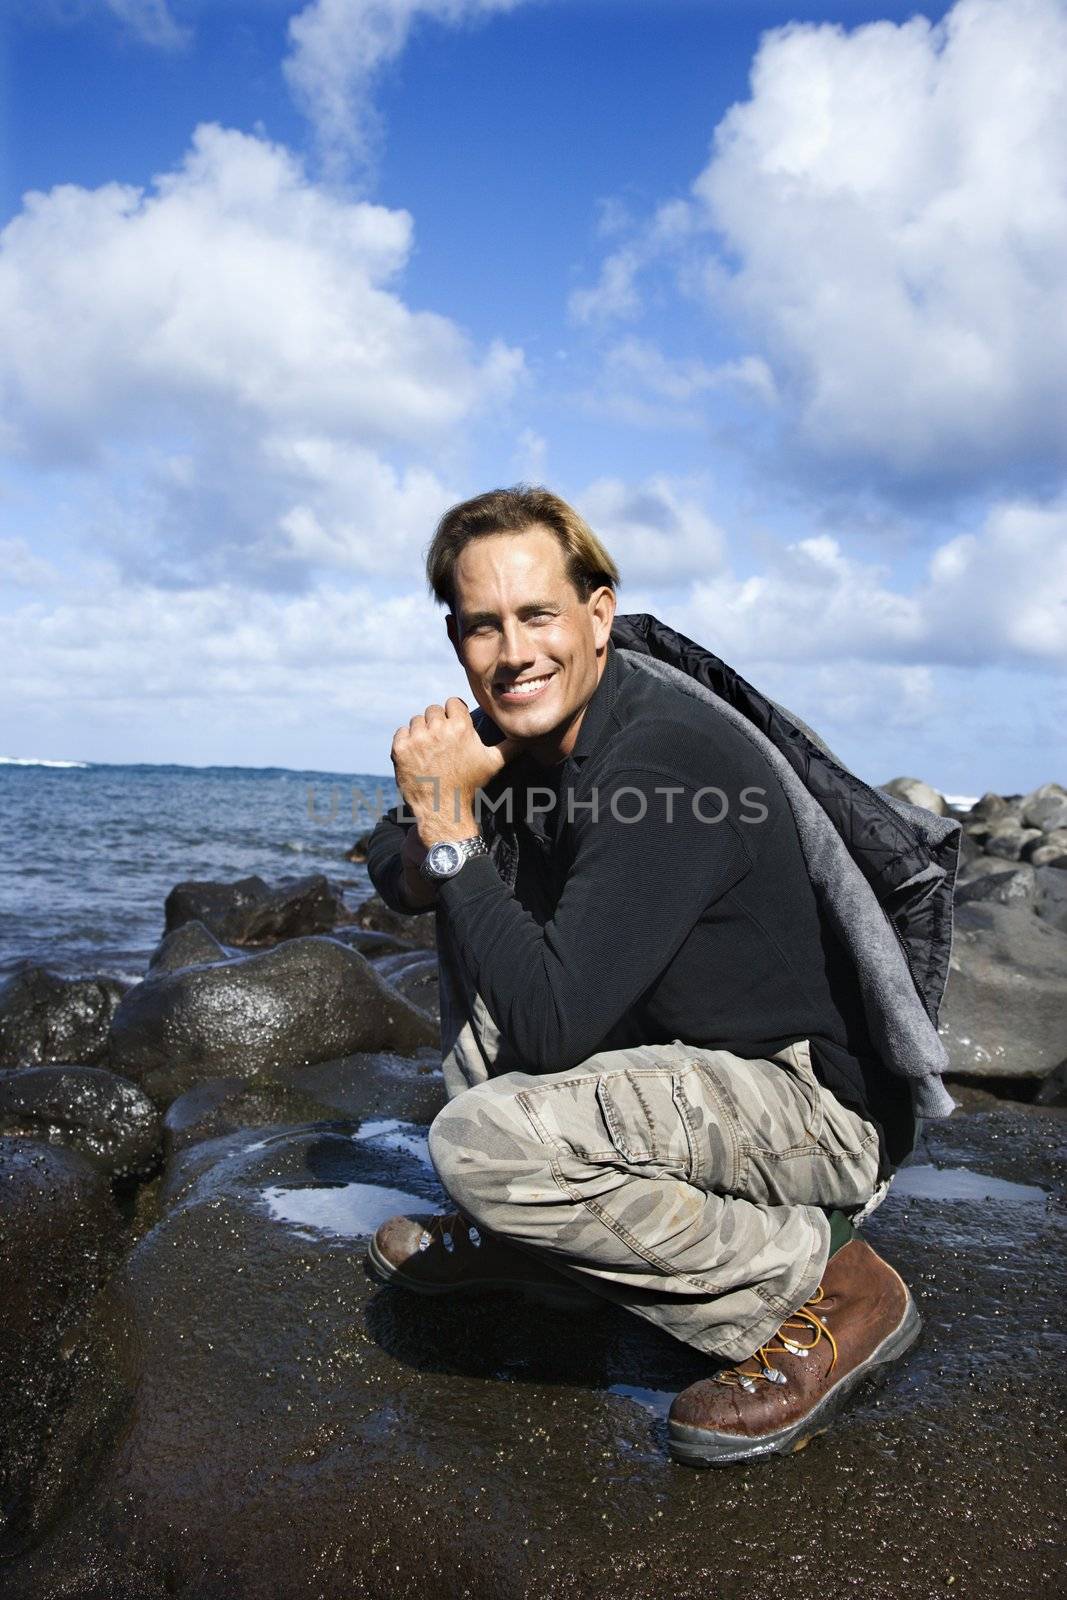 Caucasian mid-adult man kneeling on rocky coast looking at viewer smiling in Maui, Hawaii.